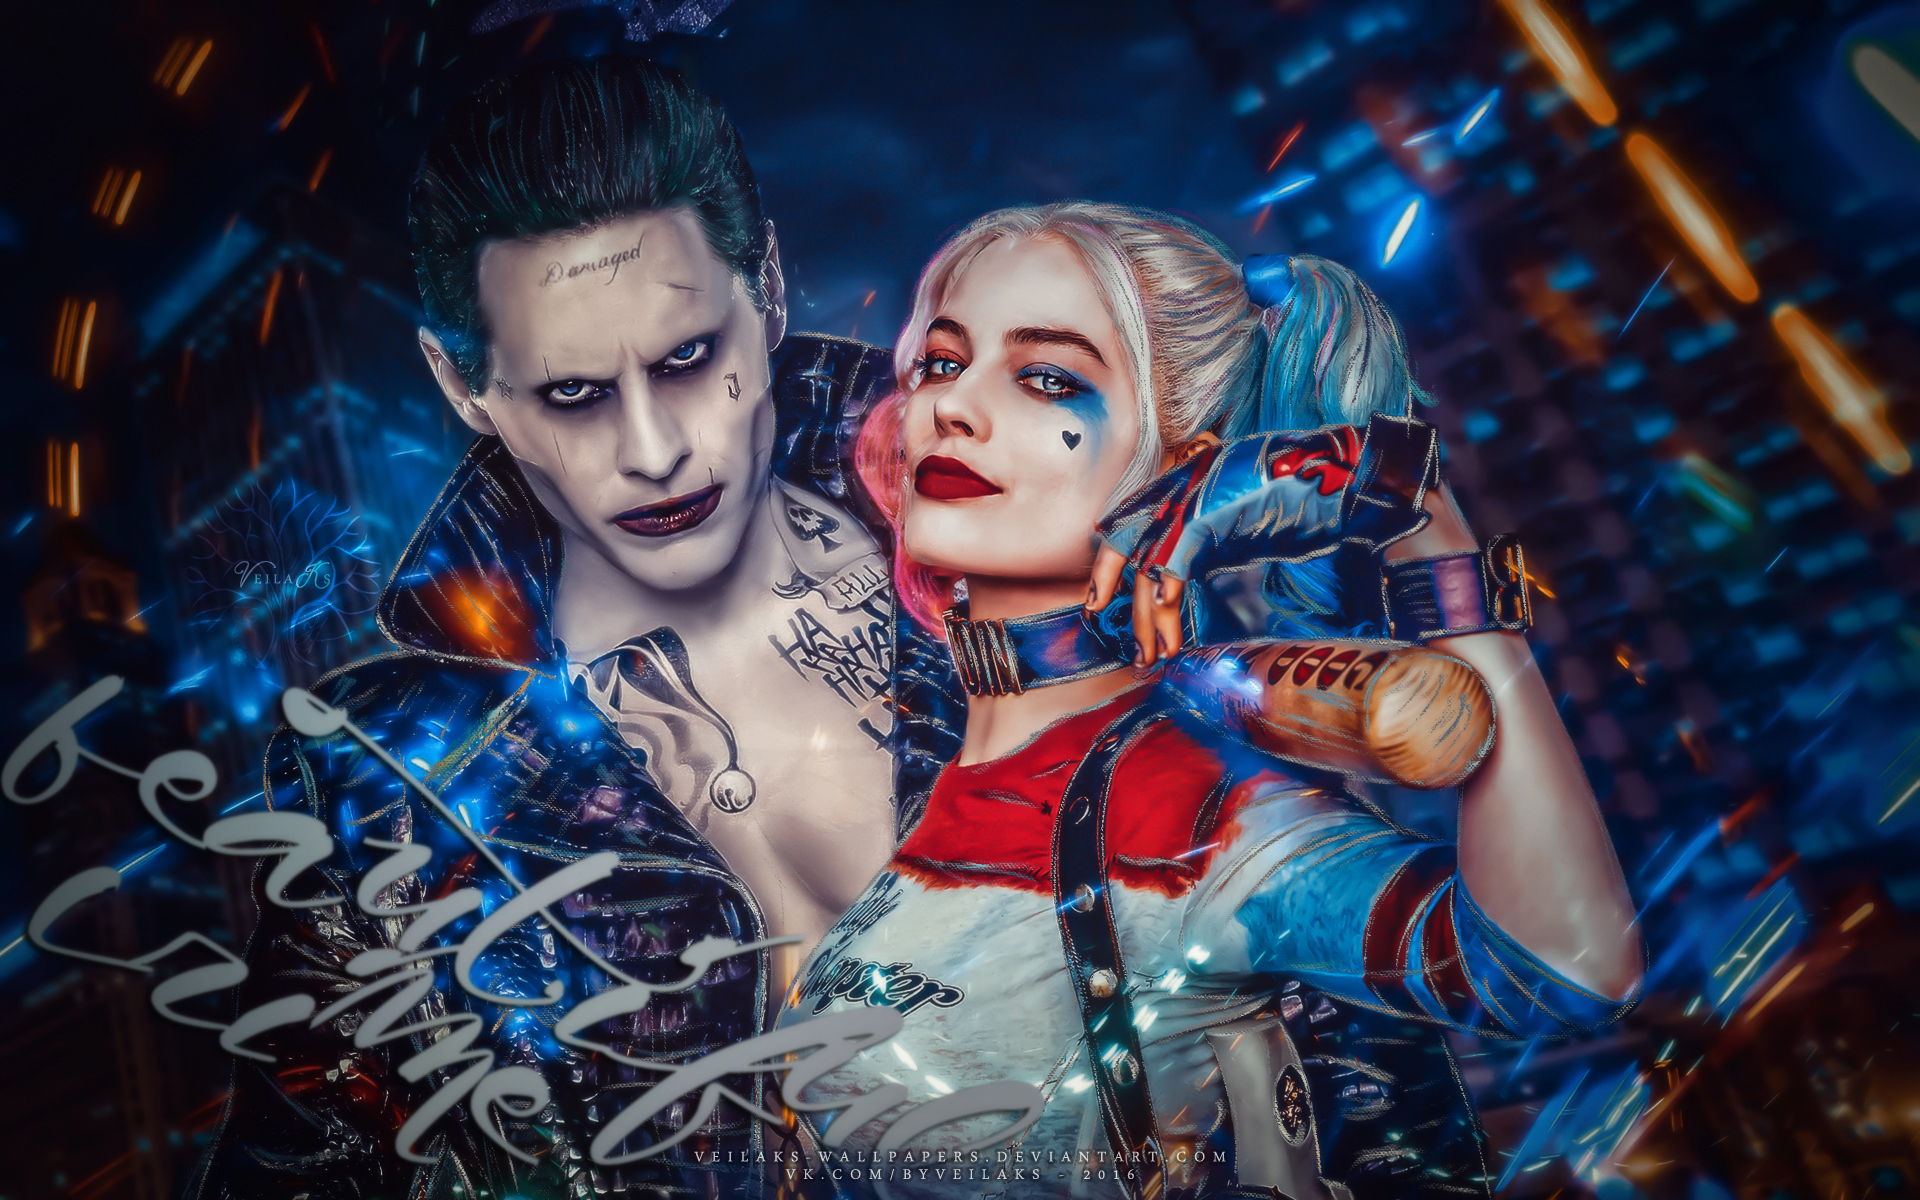 joker, margot robbie, movie, harley quinn, suicide squad, jared leto, two toned hair High Definition image